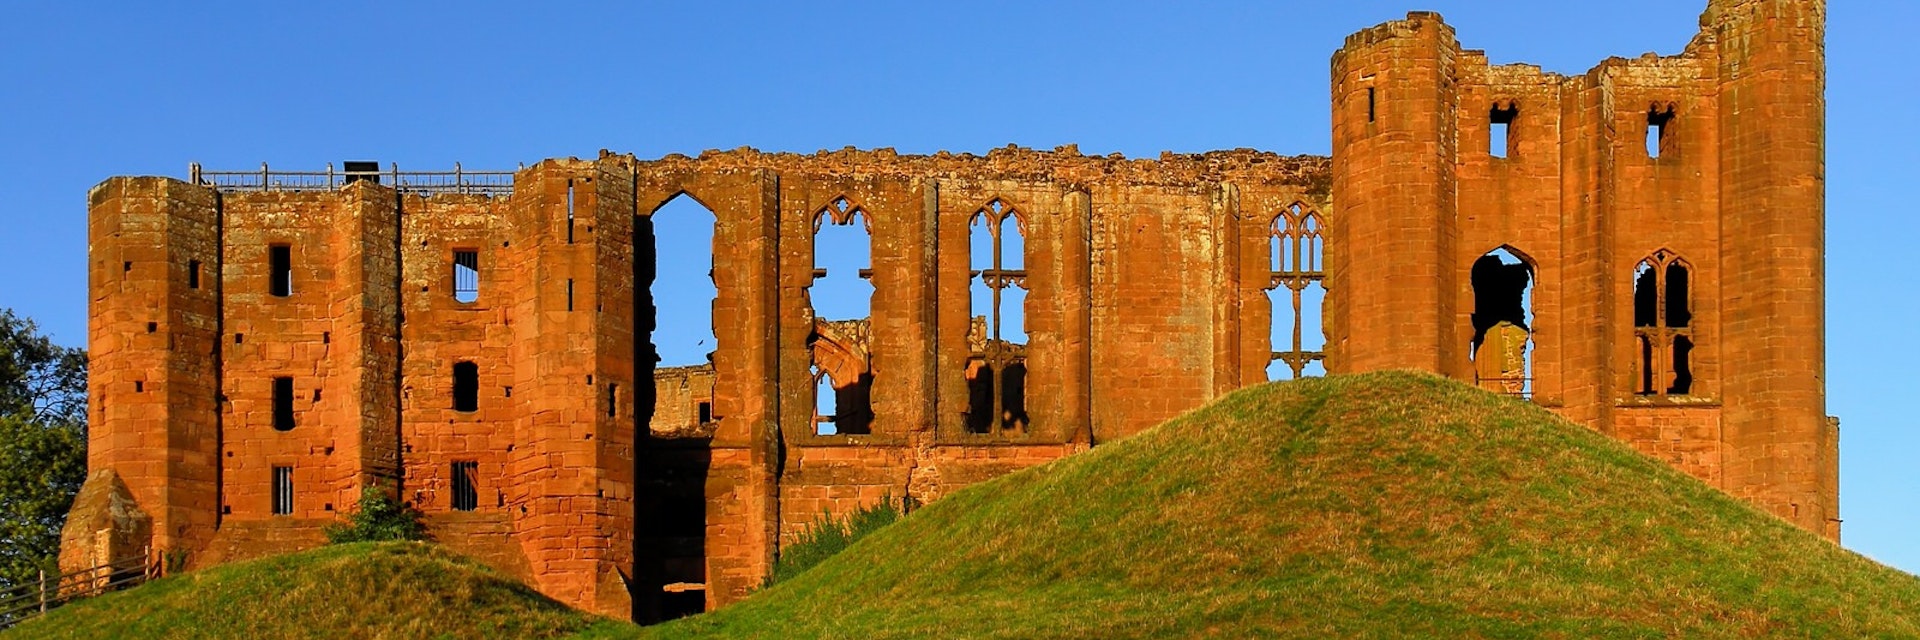 Kenilworth Castle ruins illuminated by sun, Warwickshire, England.; Shutterstock ID 169644509; Your name (First / Last): Emma Sparks; GL account no.: 65050; Netsuite department name: Online Editorial; Full Product or Project name including edition: Best in Europe POI updates